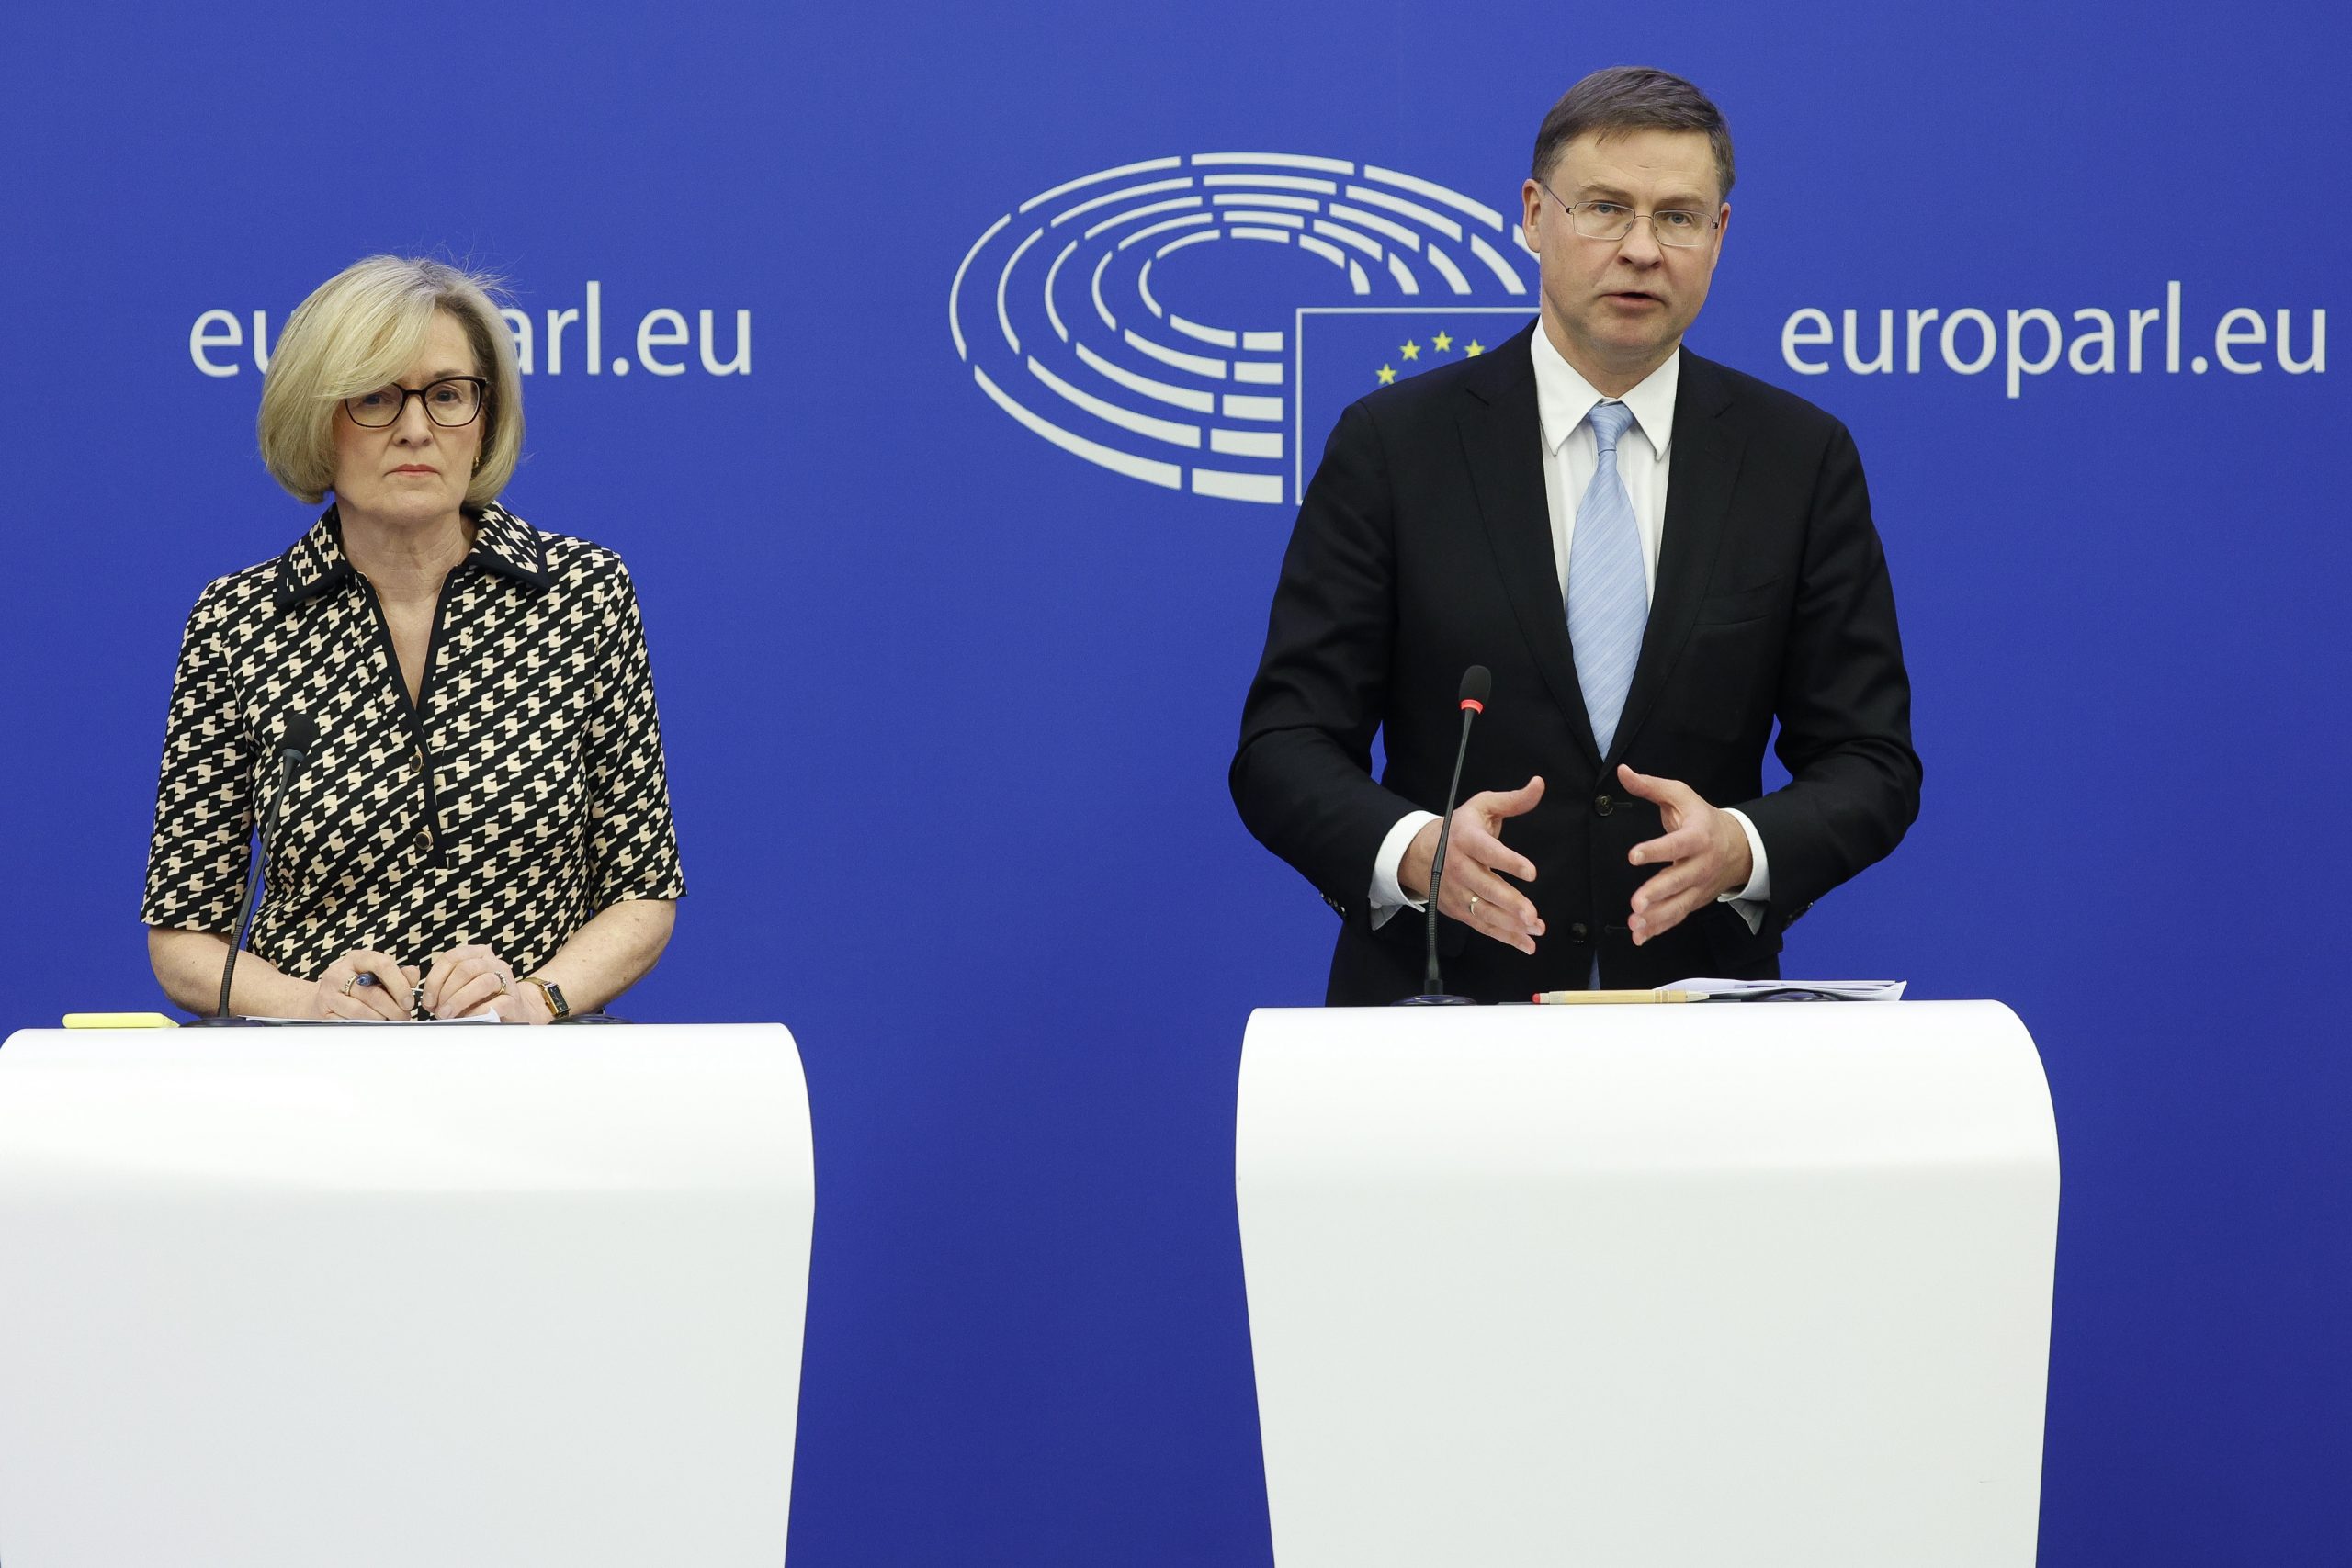 epa10578615 European Commissioner in charge of Financial Services, Financial Stability and the Capital Markets Union, Mairead McGuinness (L) and European Commissioner for Trade Valdis Dombrovskis (R) hold a joint press conference on 'the reform of the bank crisis management and deposit insurance', at the European Parliament in Strasbourg, France, 18 April 2023. The session of the European Parliament runs from 17 till 20 April.  EPA/JULIEN WARNAND